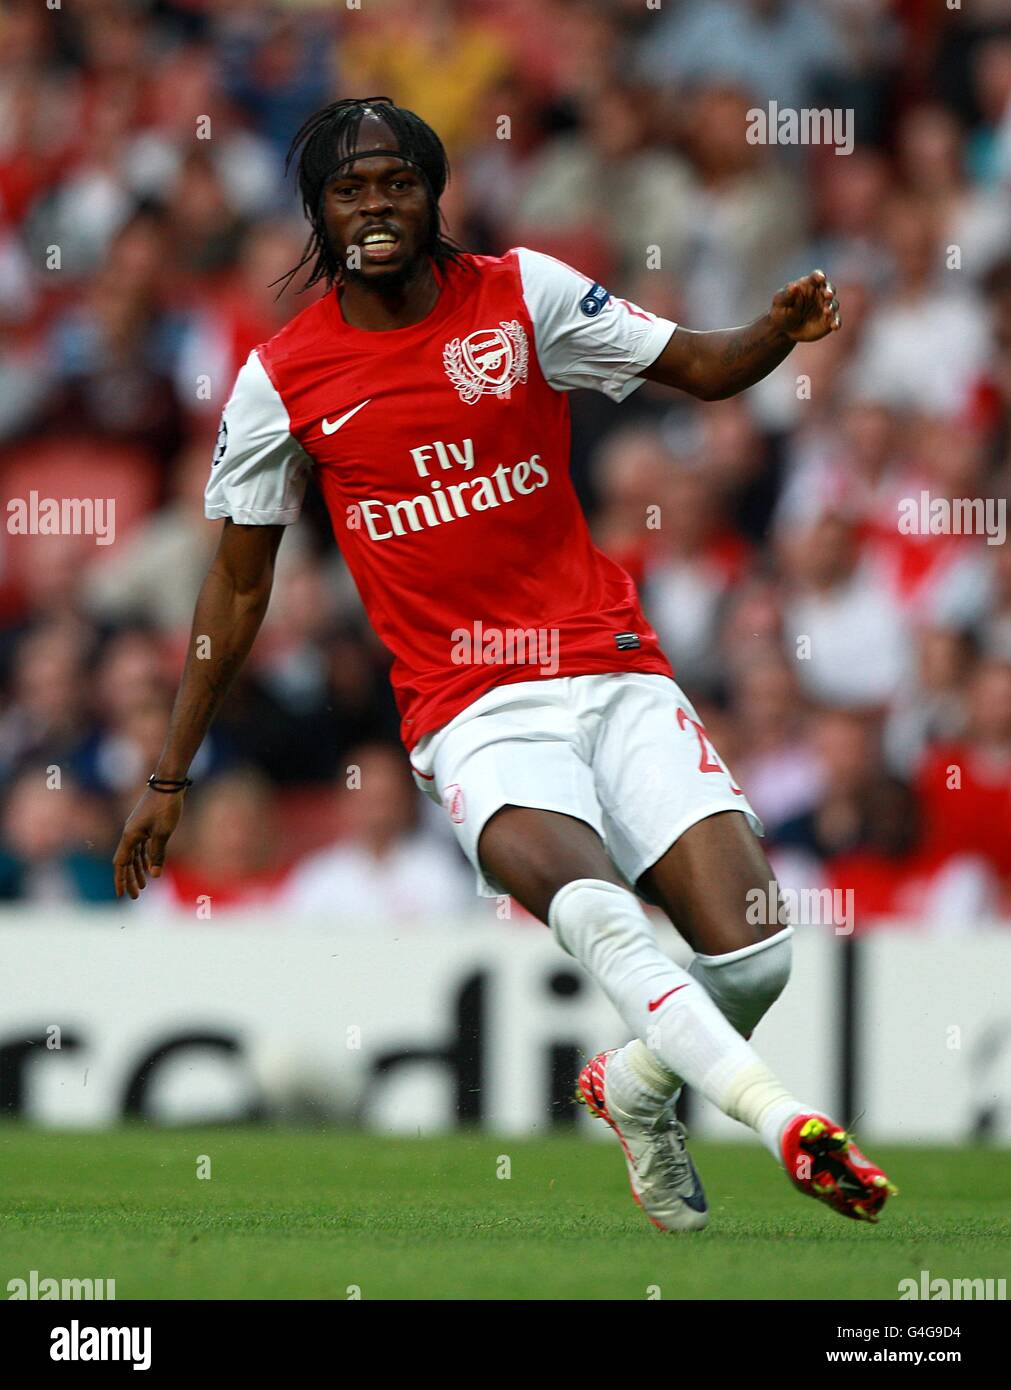 Football - UEFA Champions League - Play offs - First Leg - Arsenal v Udinese - Emirates Stadium. Yao Gervinho, Arsenal Banque D'Images